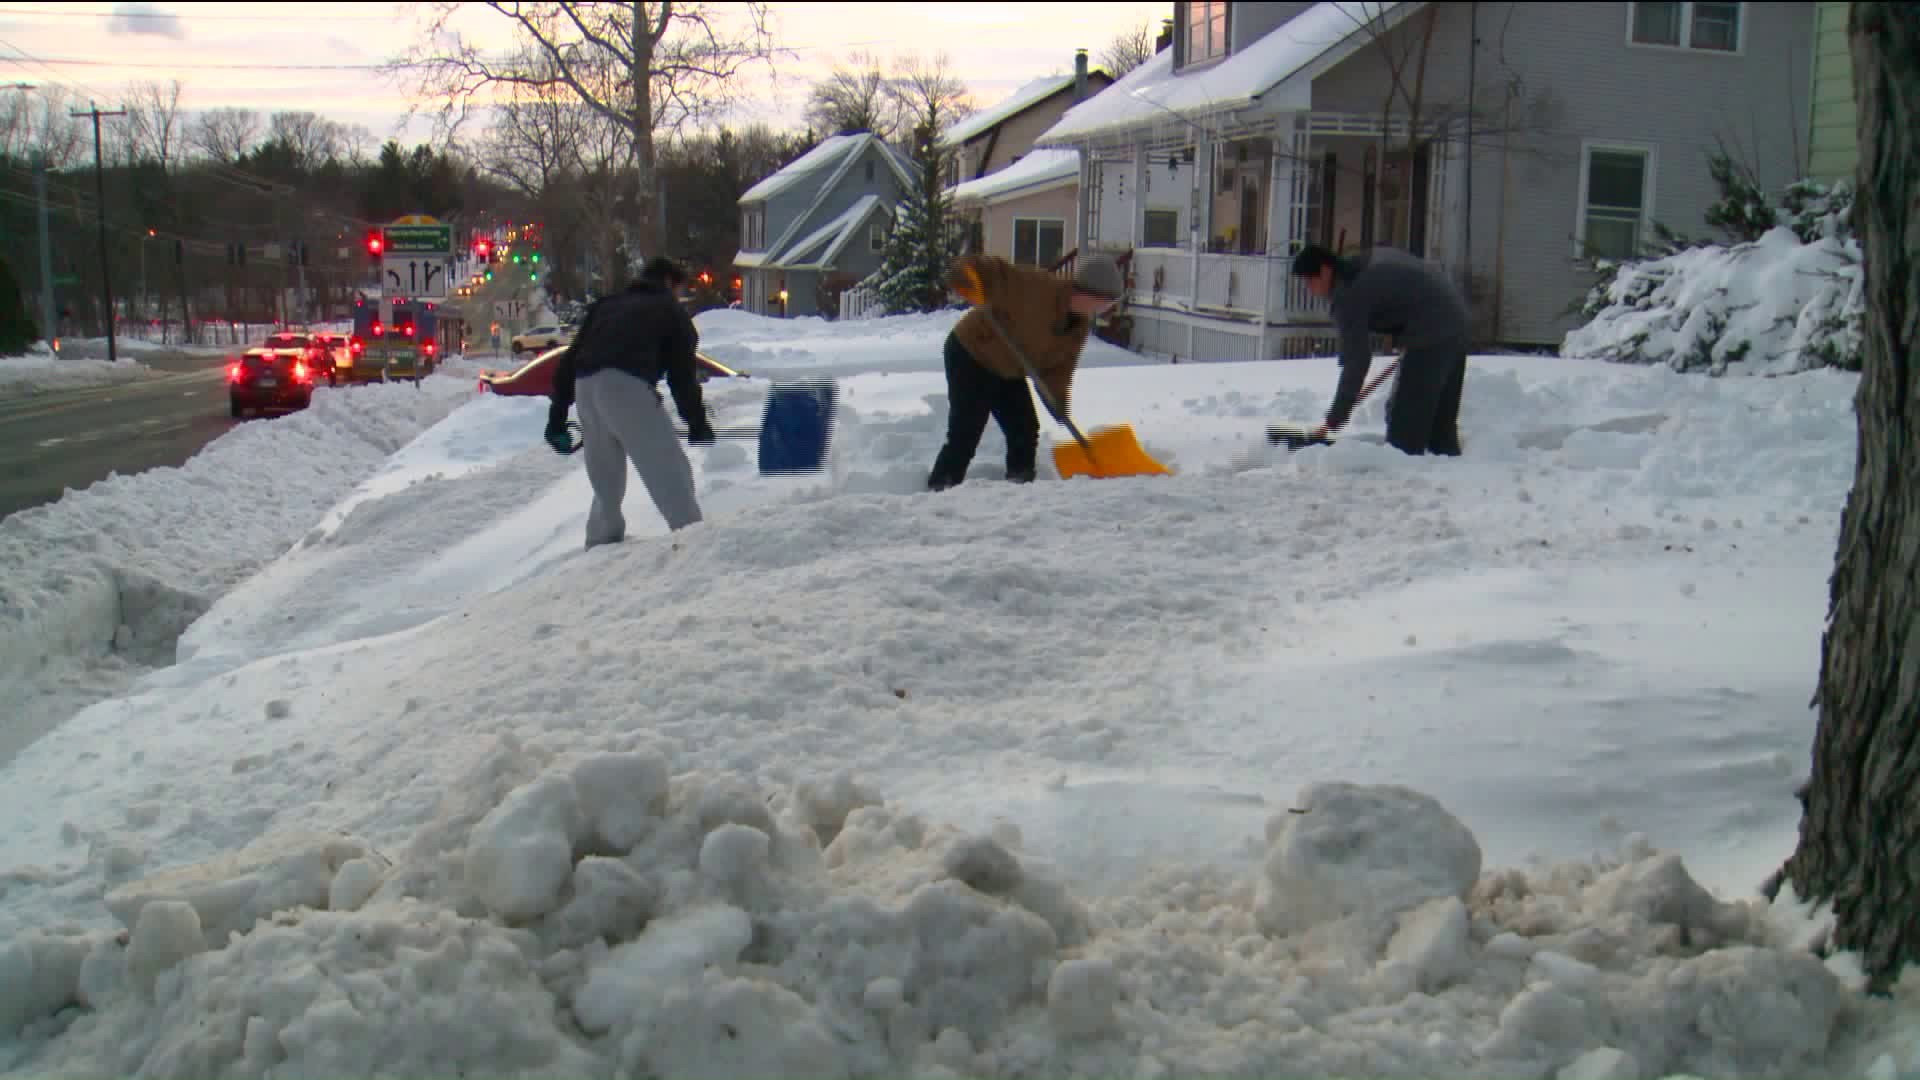 West Hartford community lends helping hand to elderly woman stuck in snow